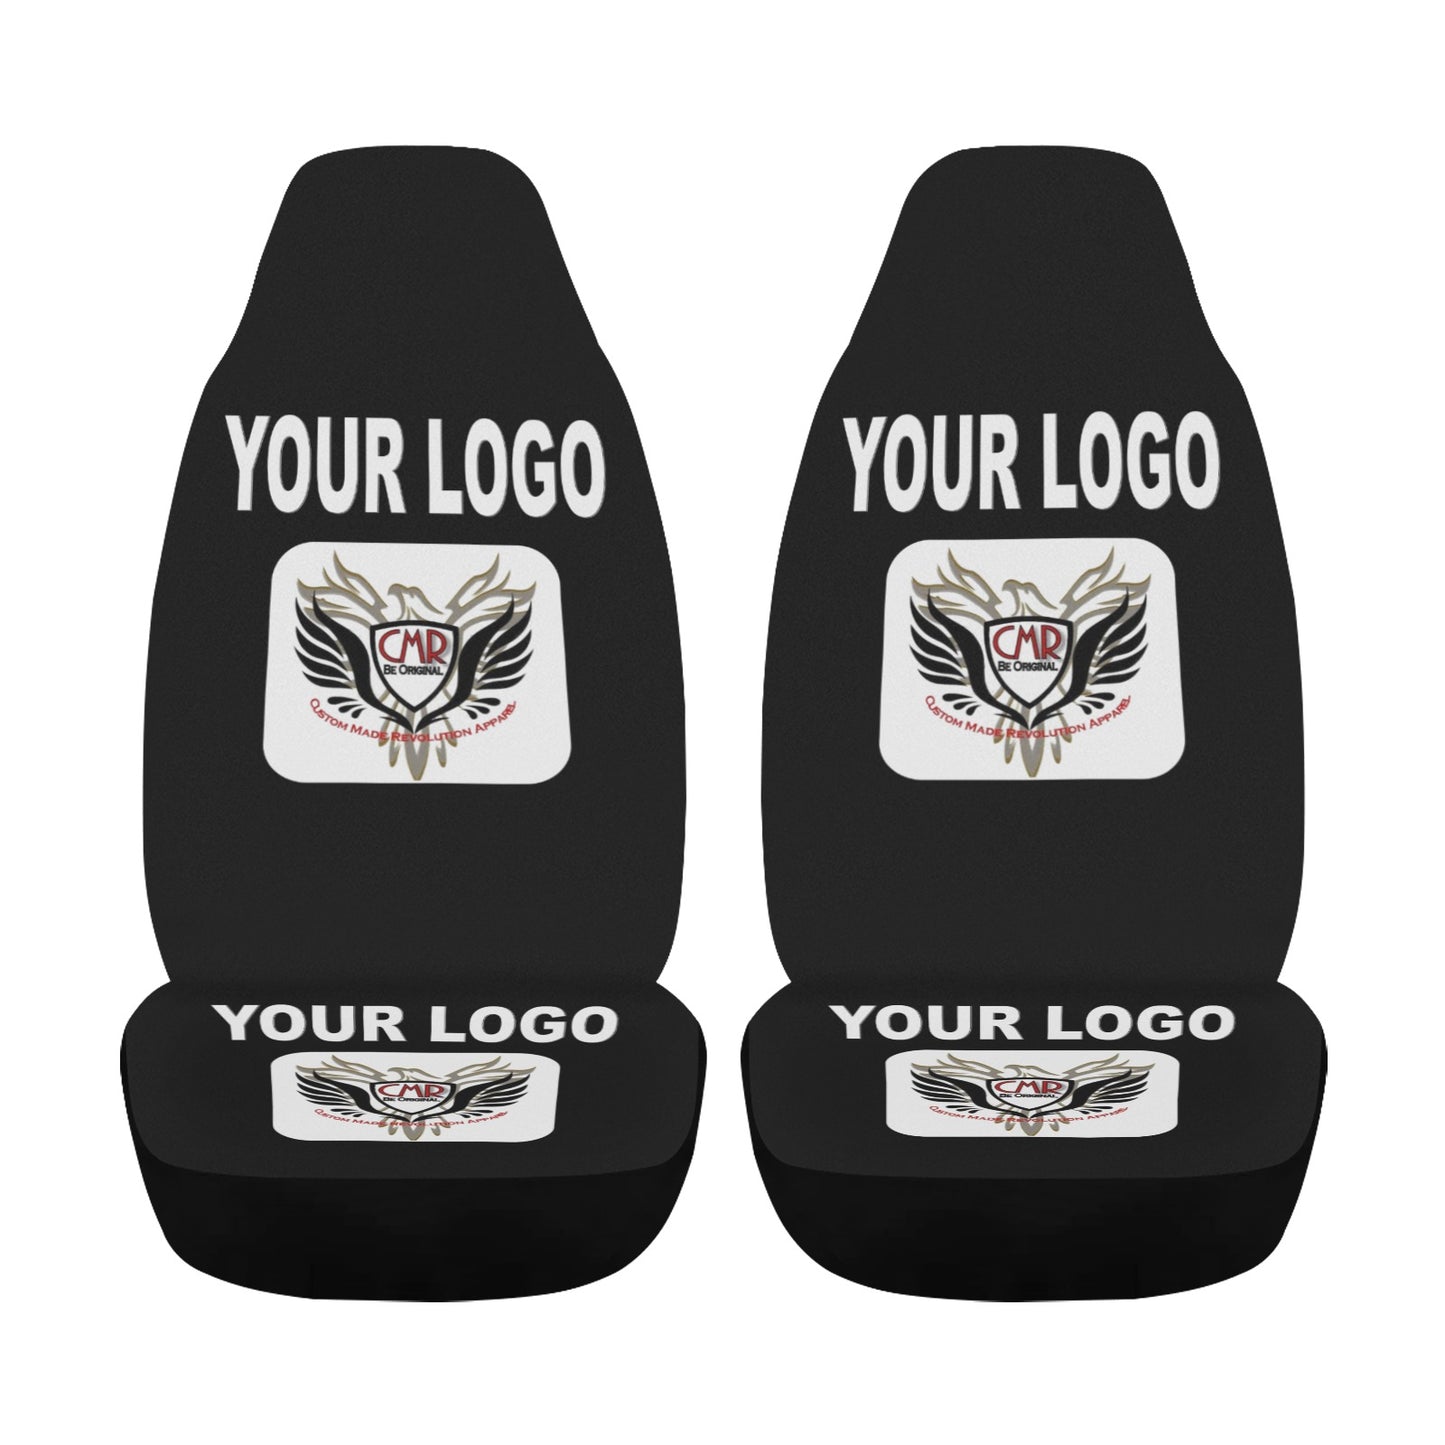 Car/Truck Seat Covers - Airbag Compatible (Set of 2)